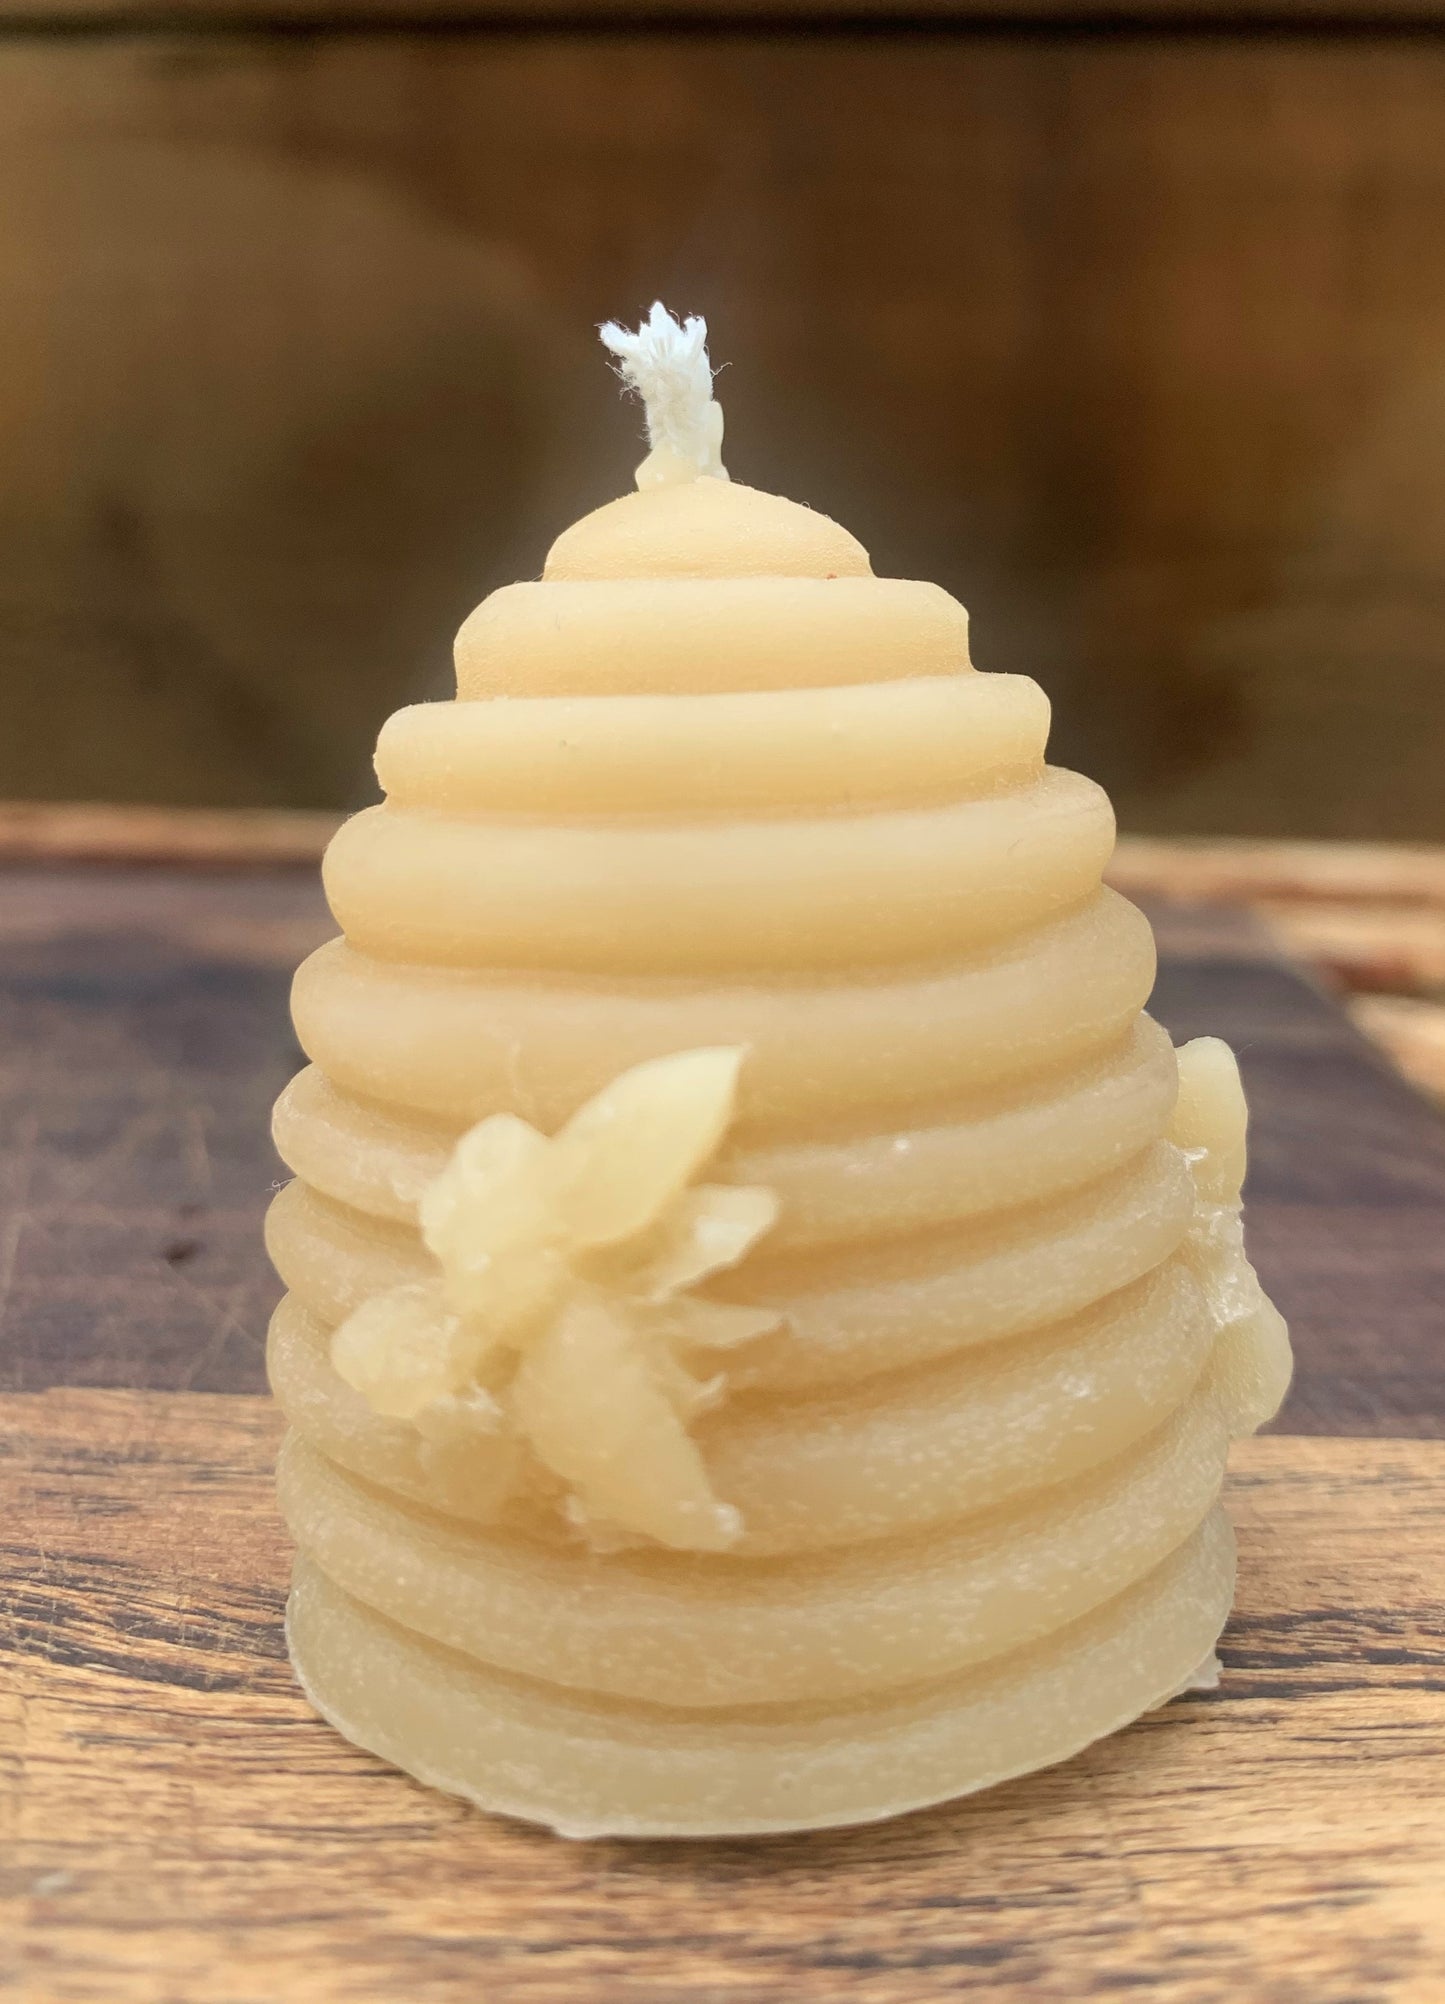 Small Beehive Skep Beeswax Candle